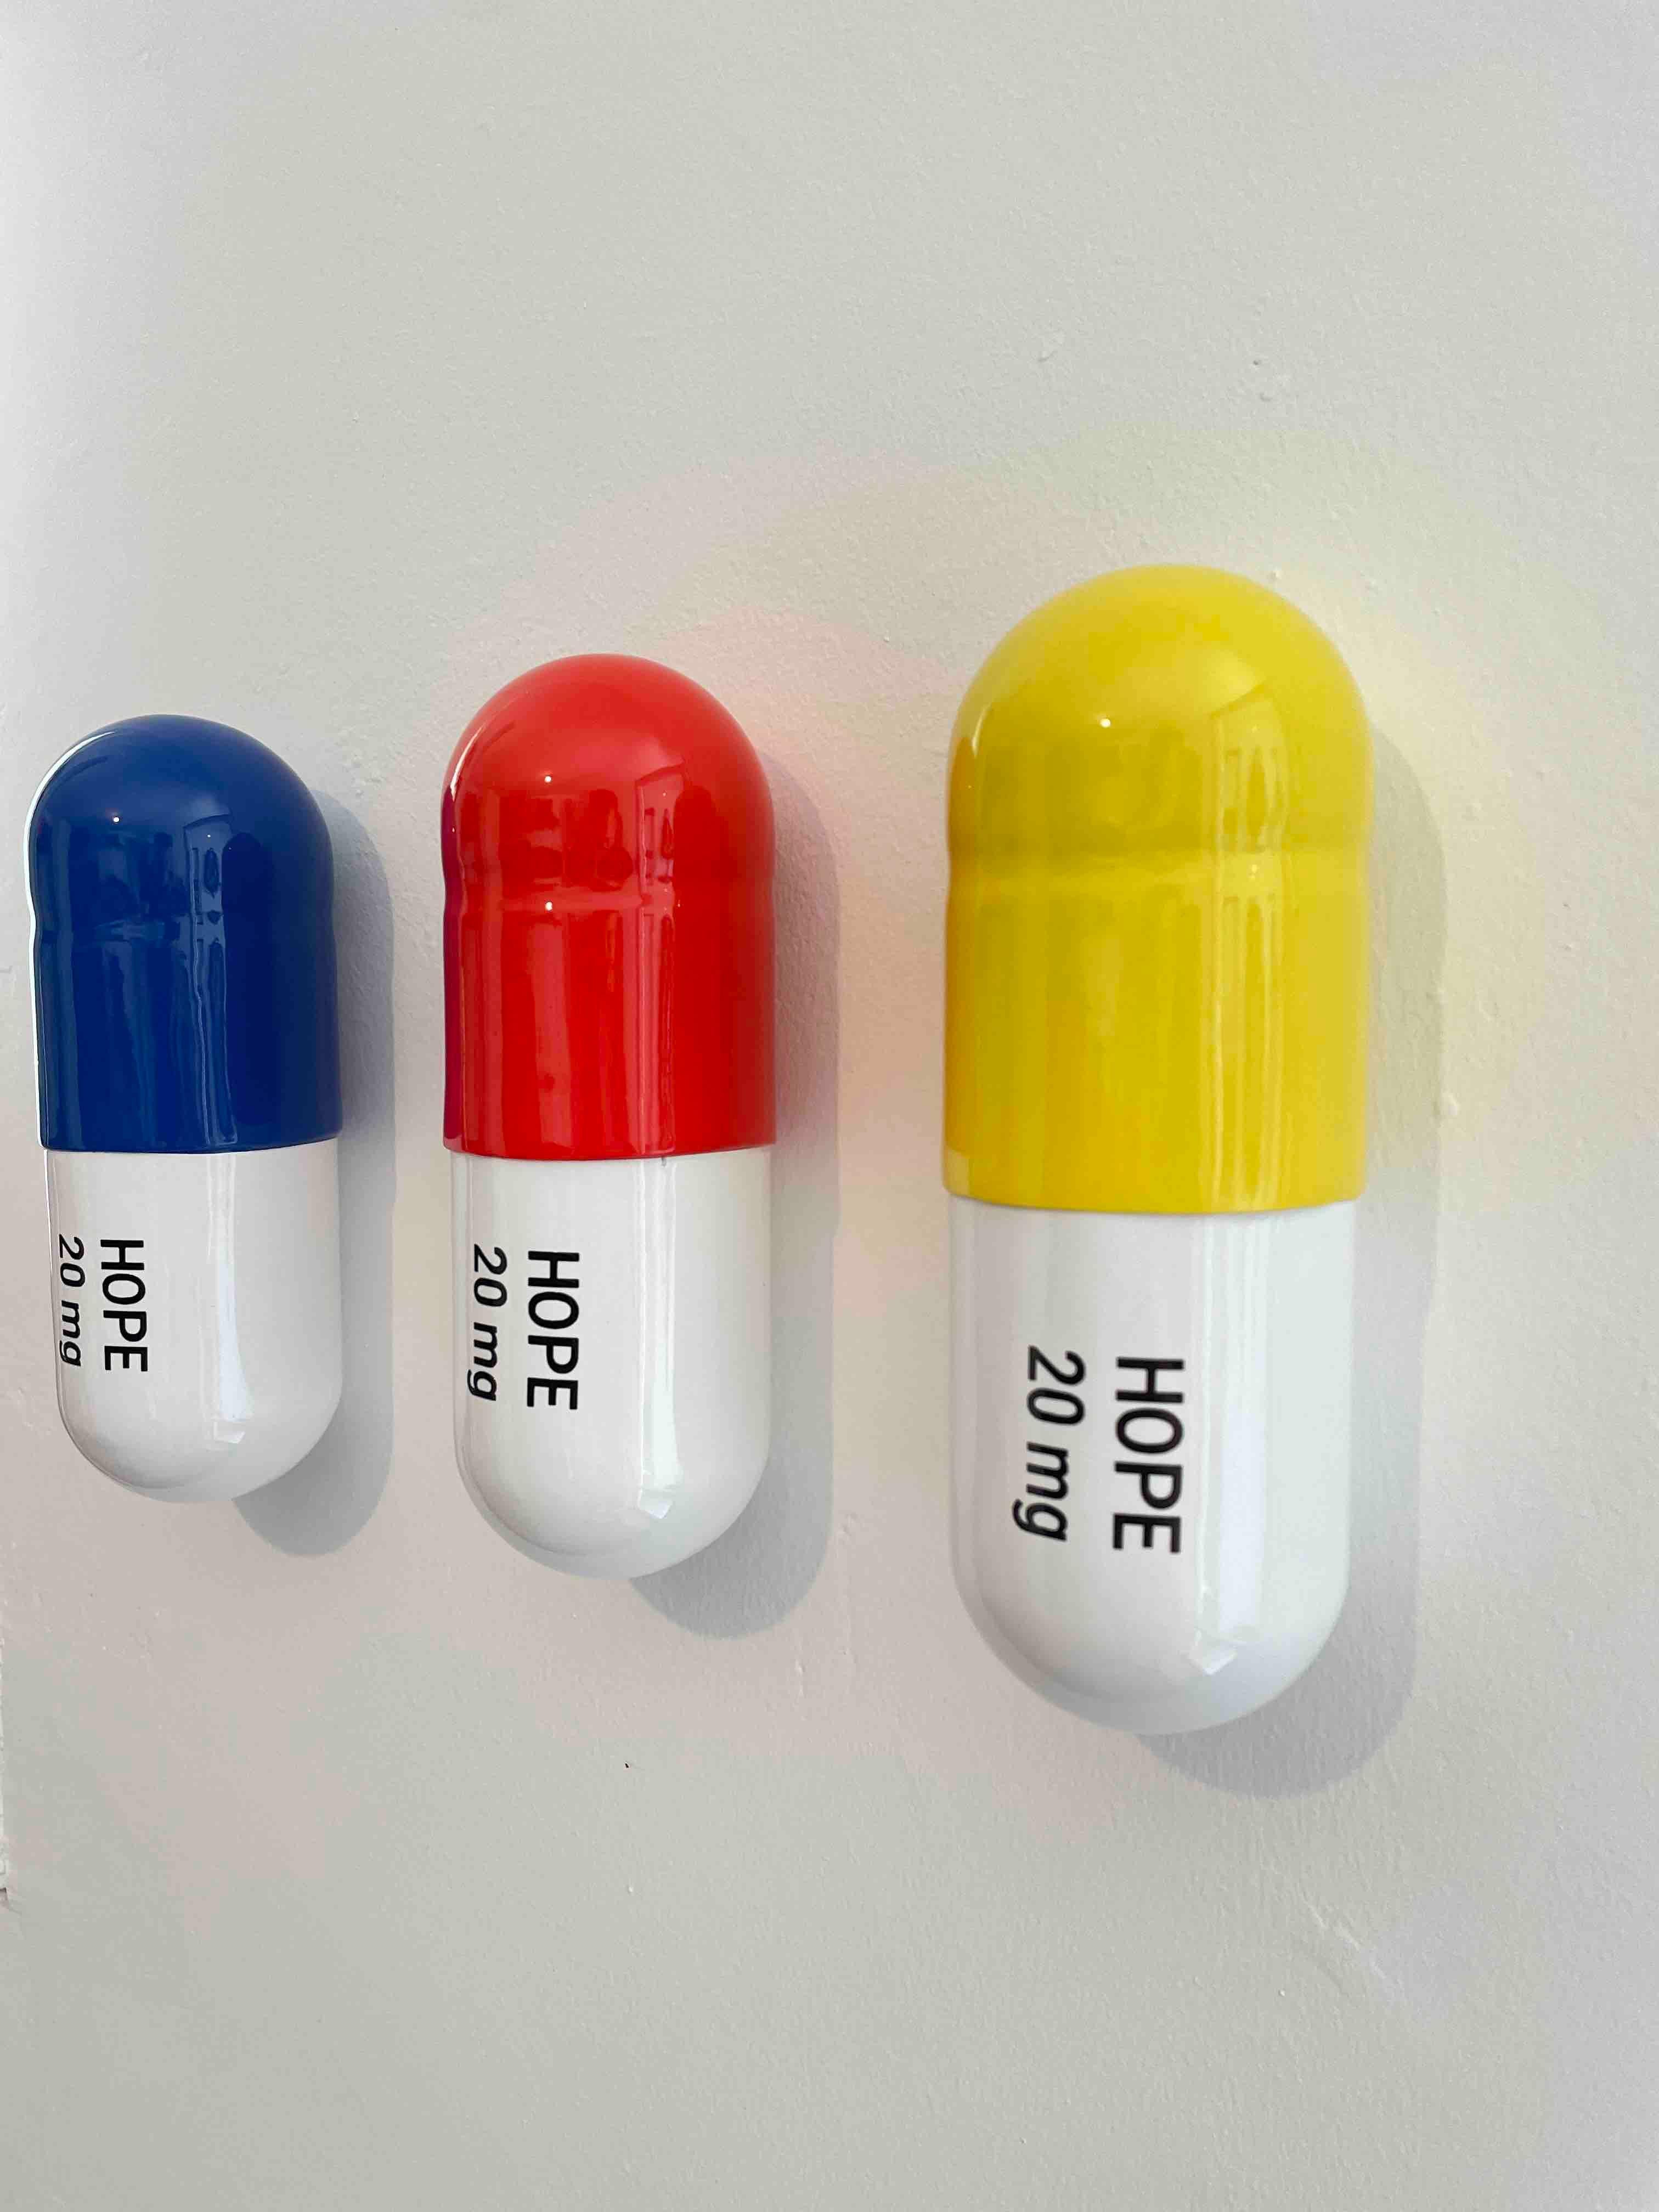 20 MG Hope pill Combo (blue, yellow and orange) - figurative sculpture - Pop Art Sculpture by Tal Nehoray